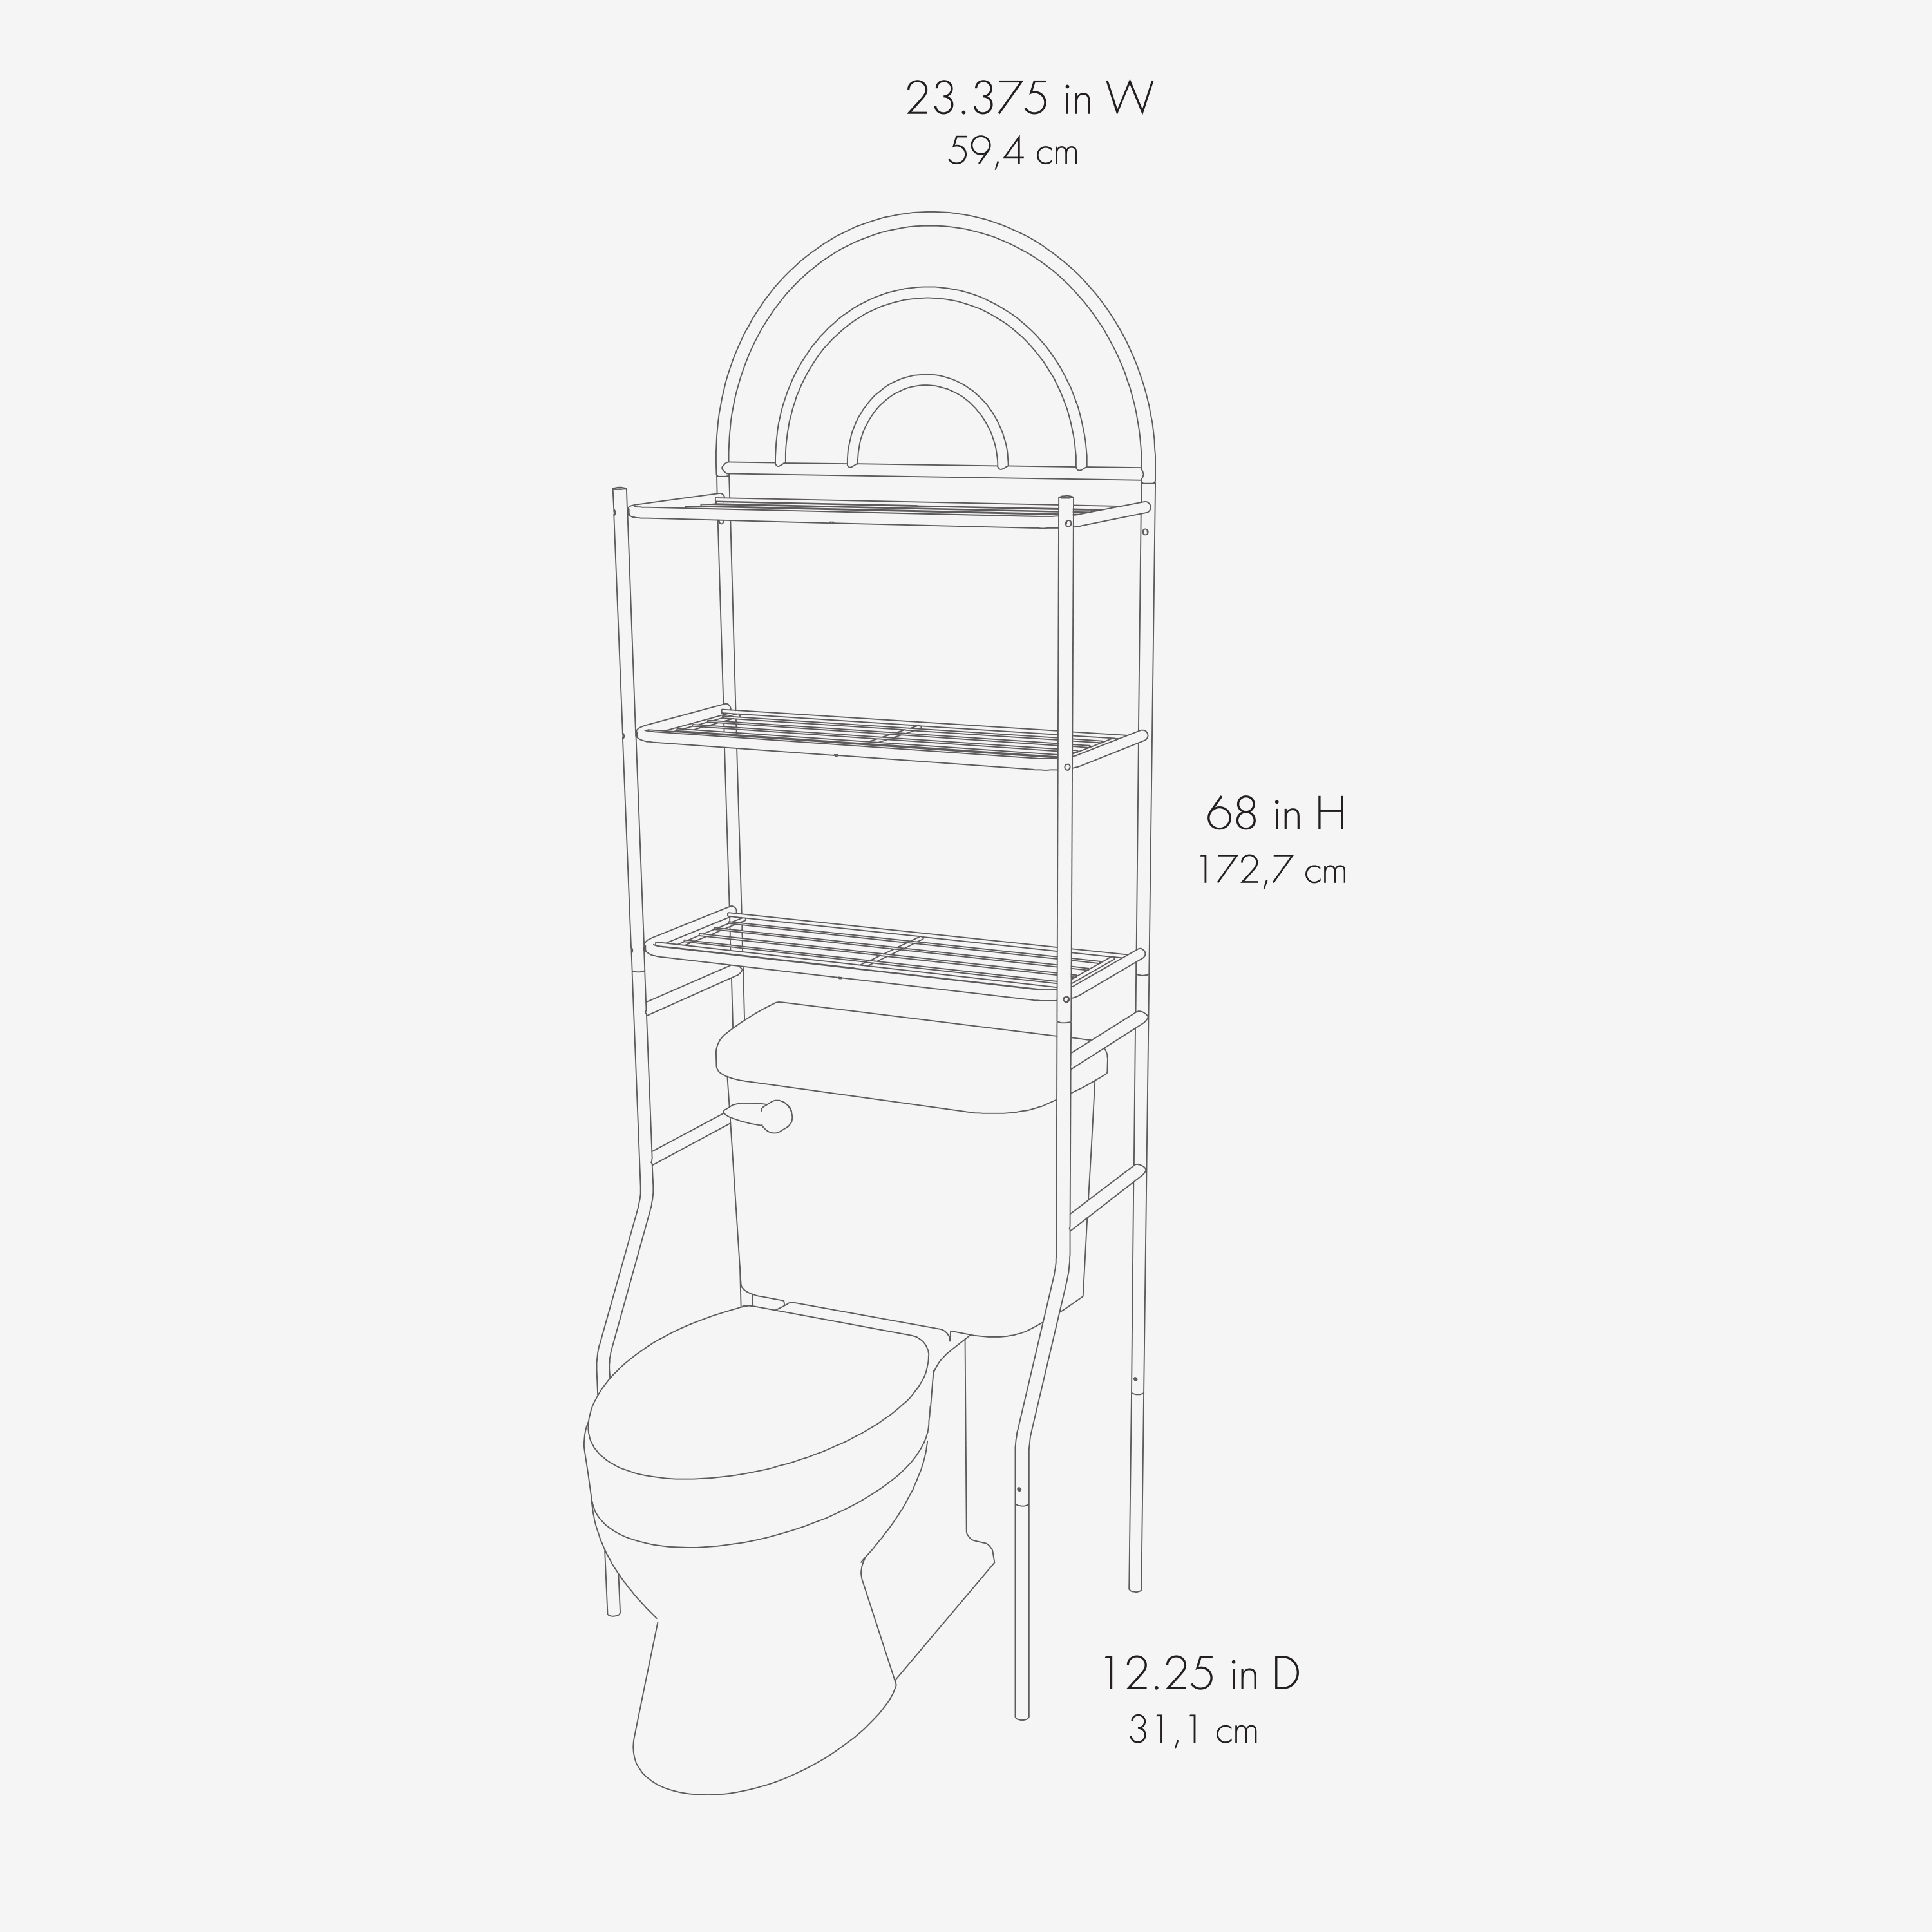 Zenna Home over-the-Toilet Bathroom Spacesaver with 3 Storage Shelves, Metal Arch-Style, White - image 5 of 5